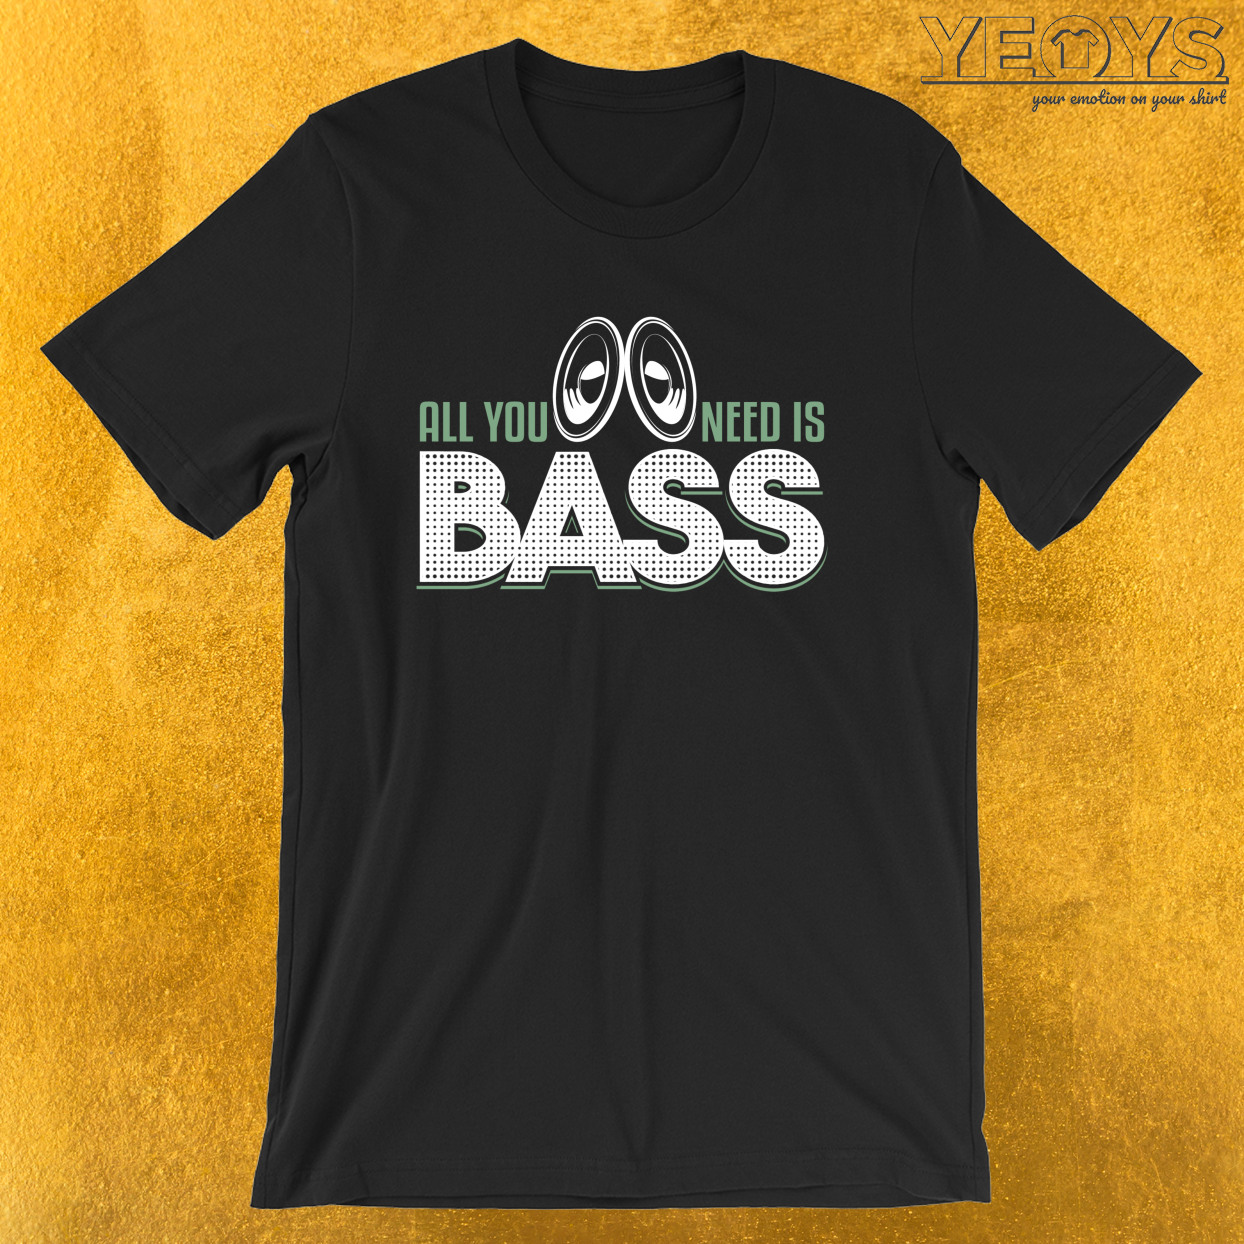 All You Need Is Bass – Dubstep Quotes Tee